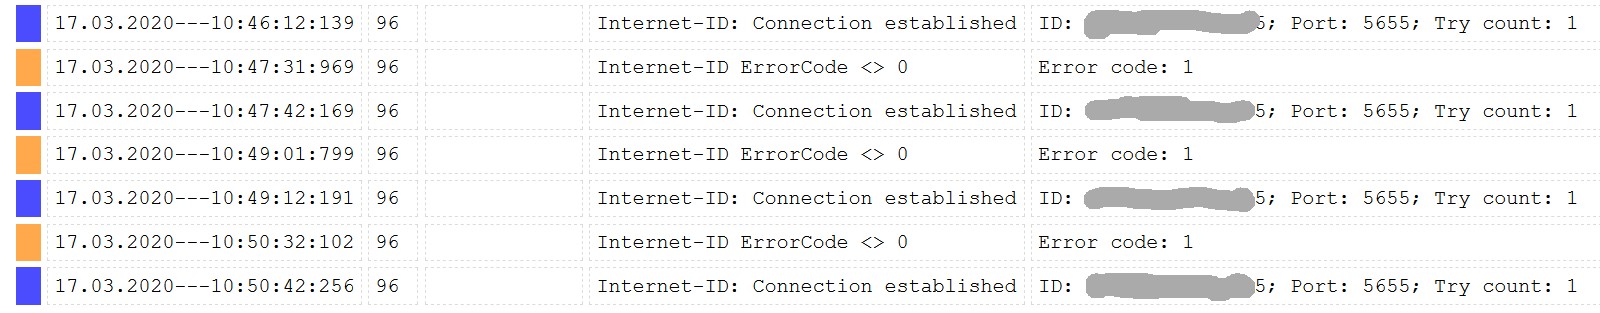 Connection problem - all computers (hosts) OFFLINE